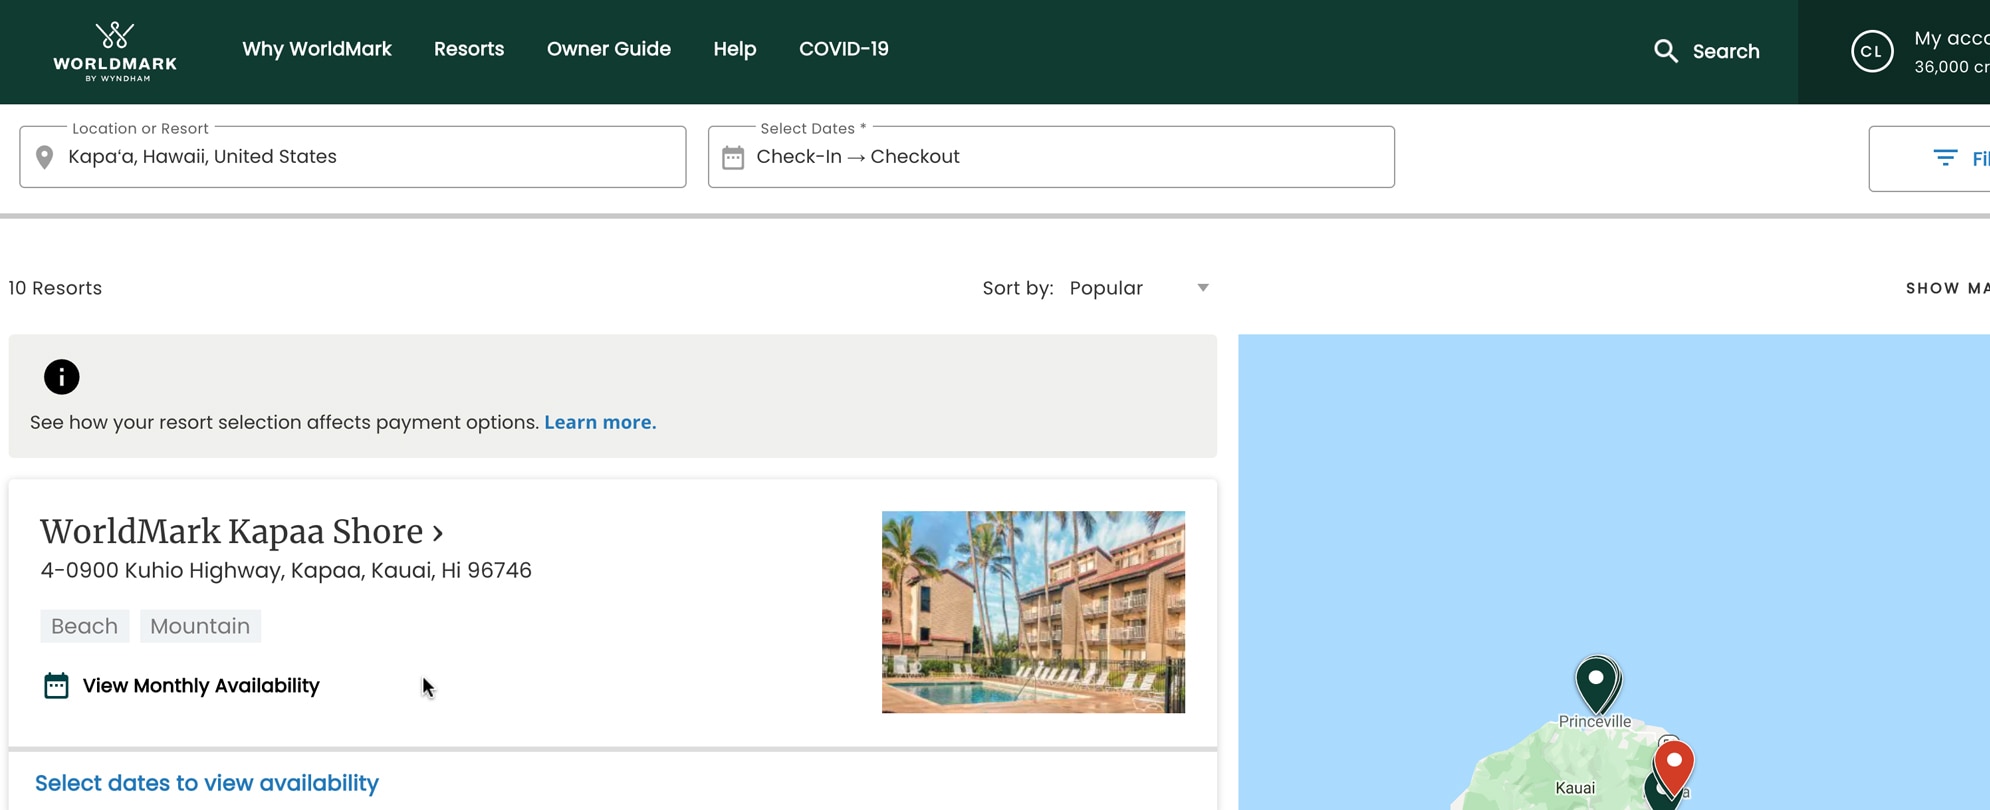 A screenshot of the resorts section on the WorldMark website showing how to view availability and the resort waitlist.